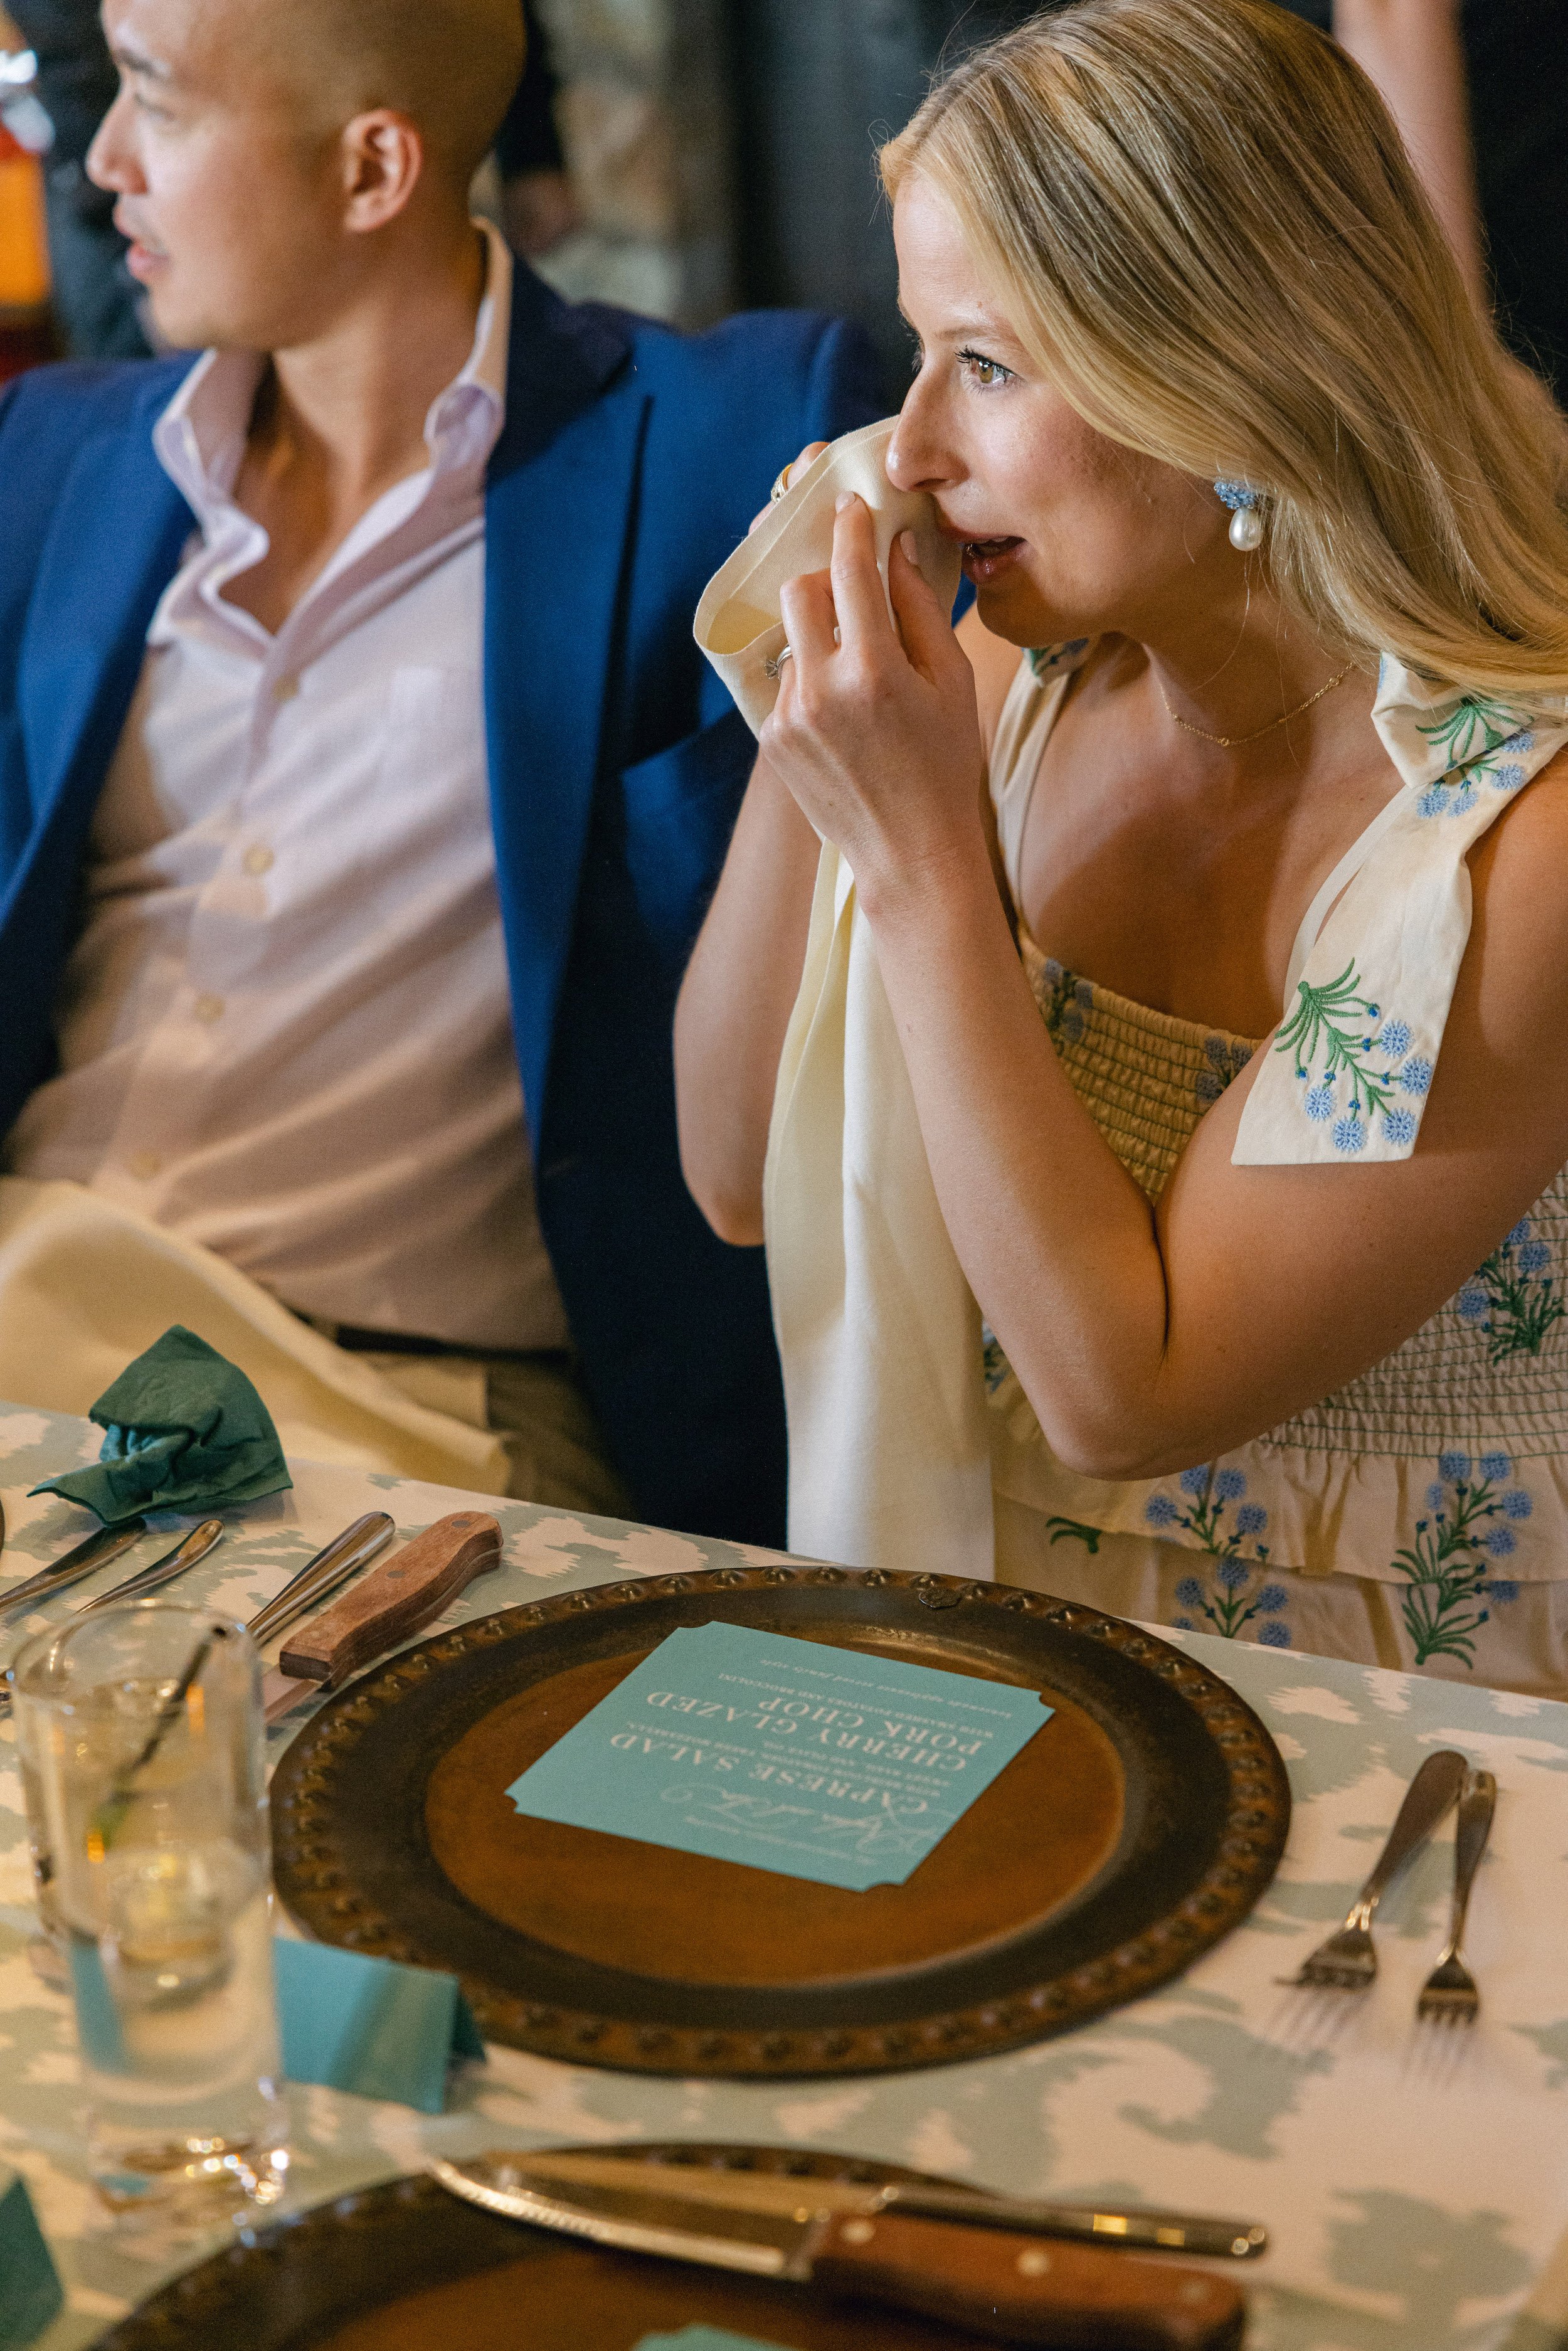 Guest is Emotional During Speech at Rehearsal Dinner